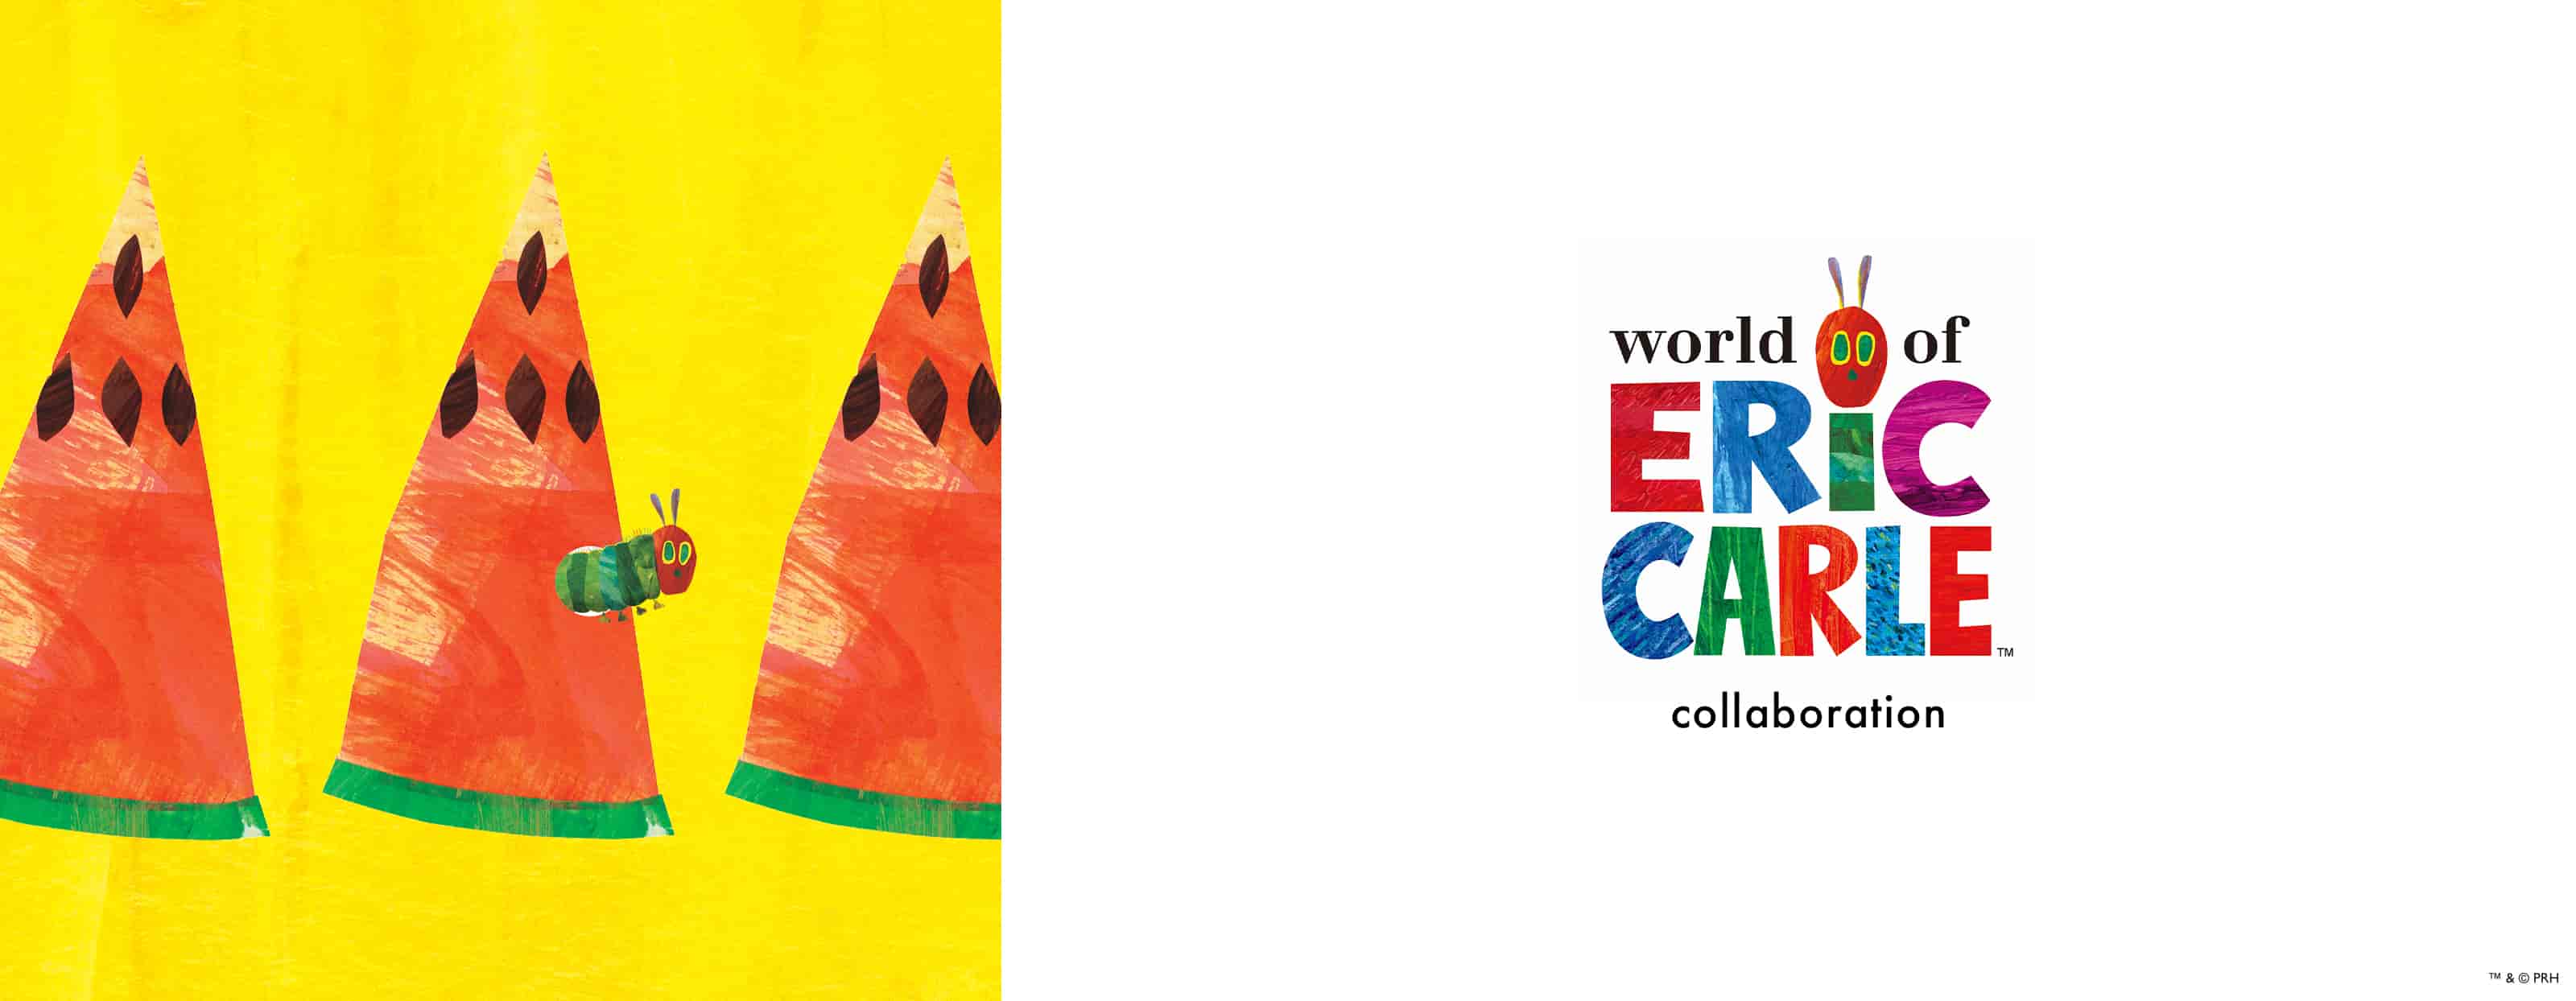 graniph presents the wonderful world of illustrator and children's book writer Eric Carle. Featuring the charming characters from some of his most popular books.  There is something for all kids - big and small! [ssorder:-20240412]